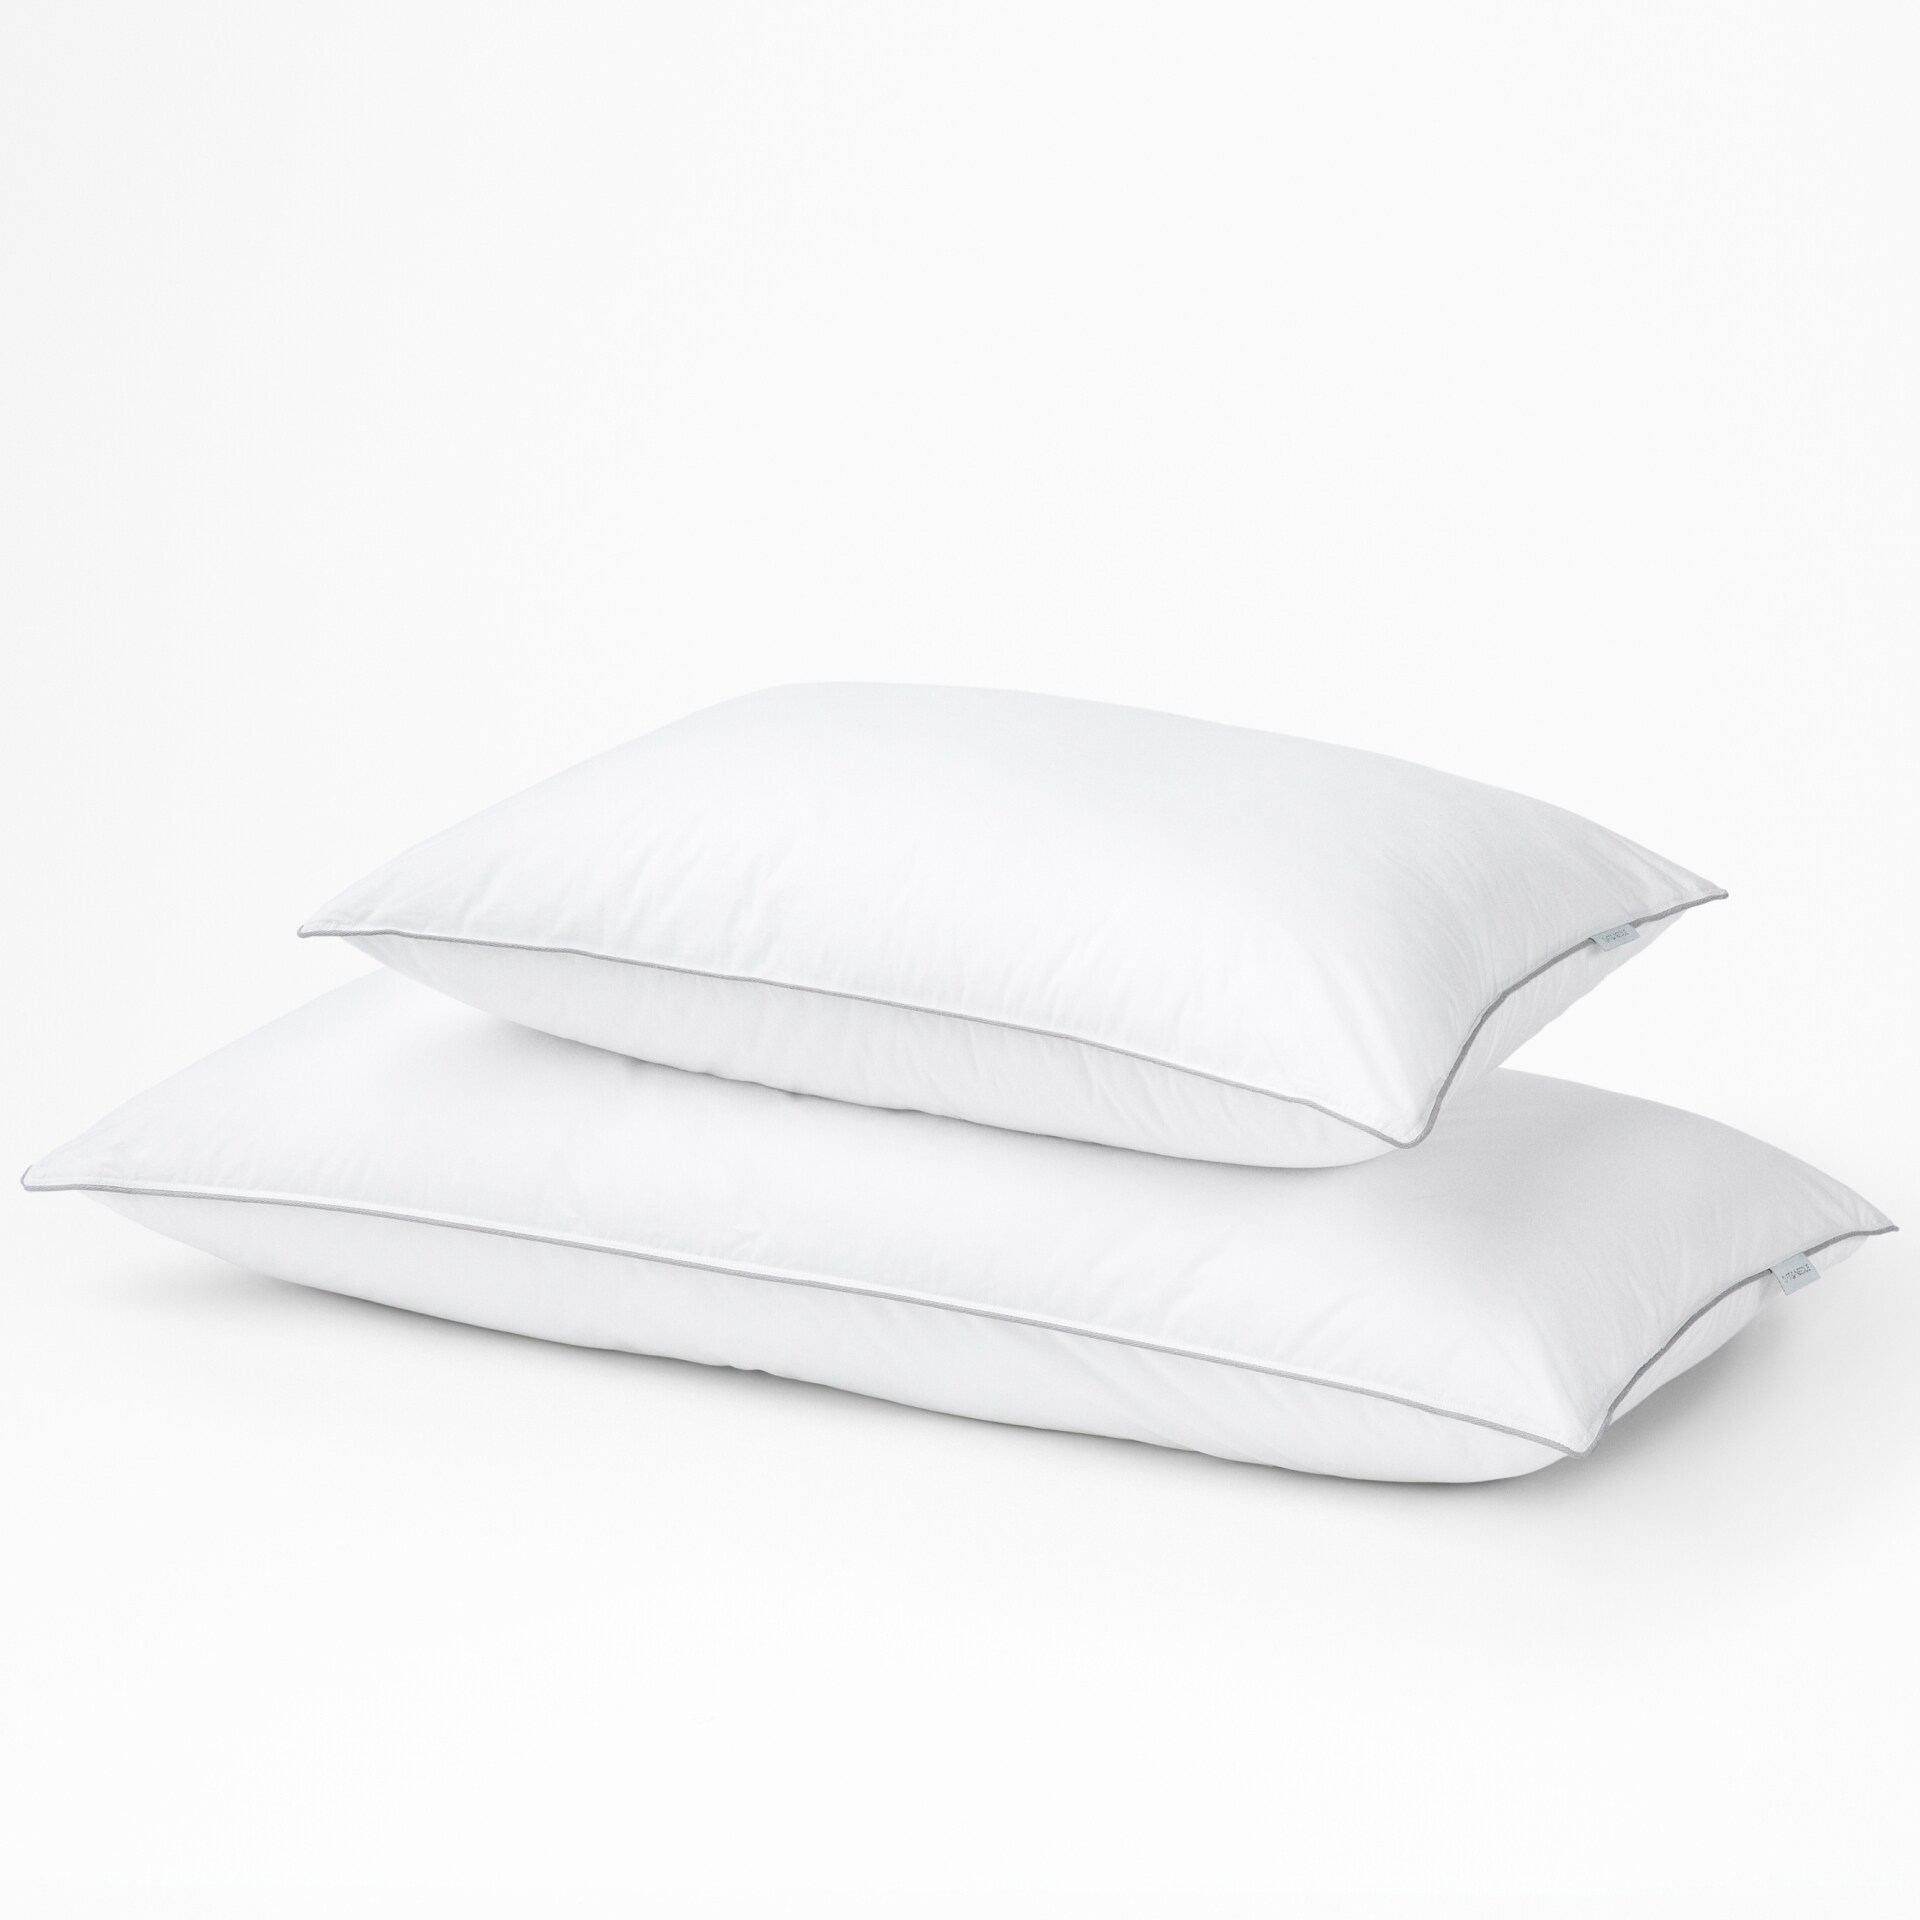 https://ak1.ostkcdn.com/images/products/is/images/direct/78be61465c33d9e8290af8d19396e0d7bf9fce32/Down-Alternative-Pillow-2-Pack---Standard.jpg